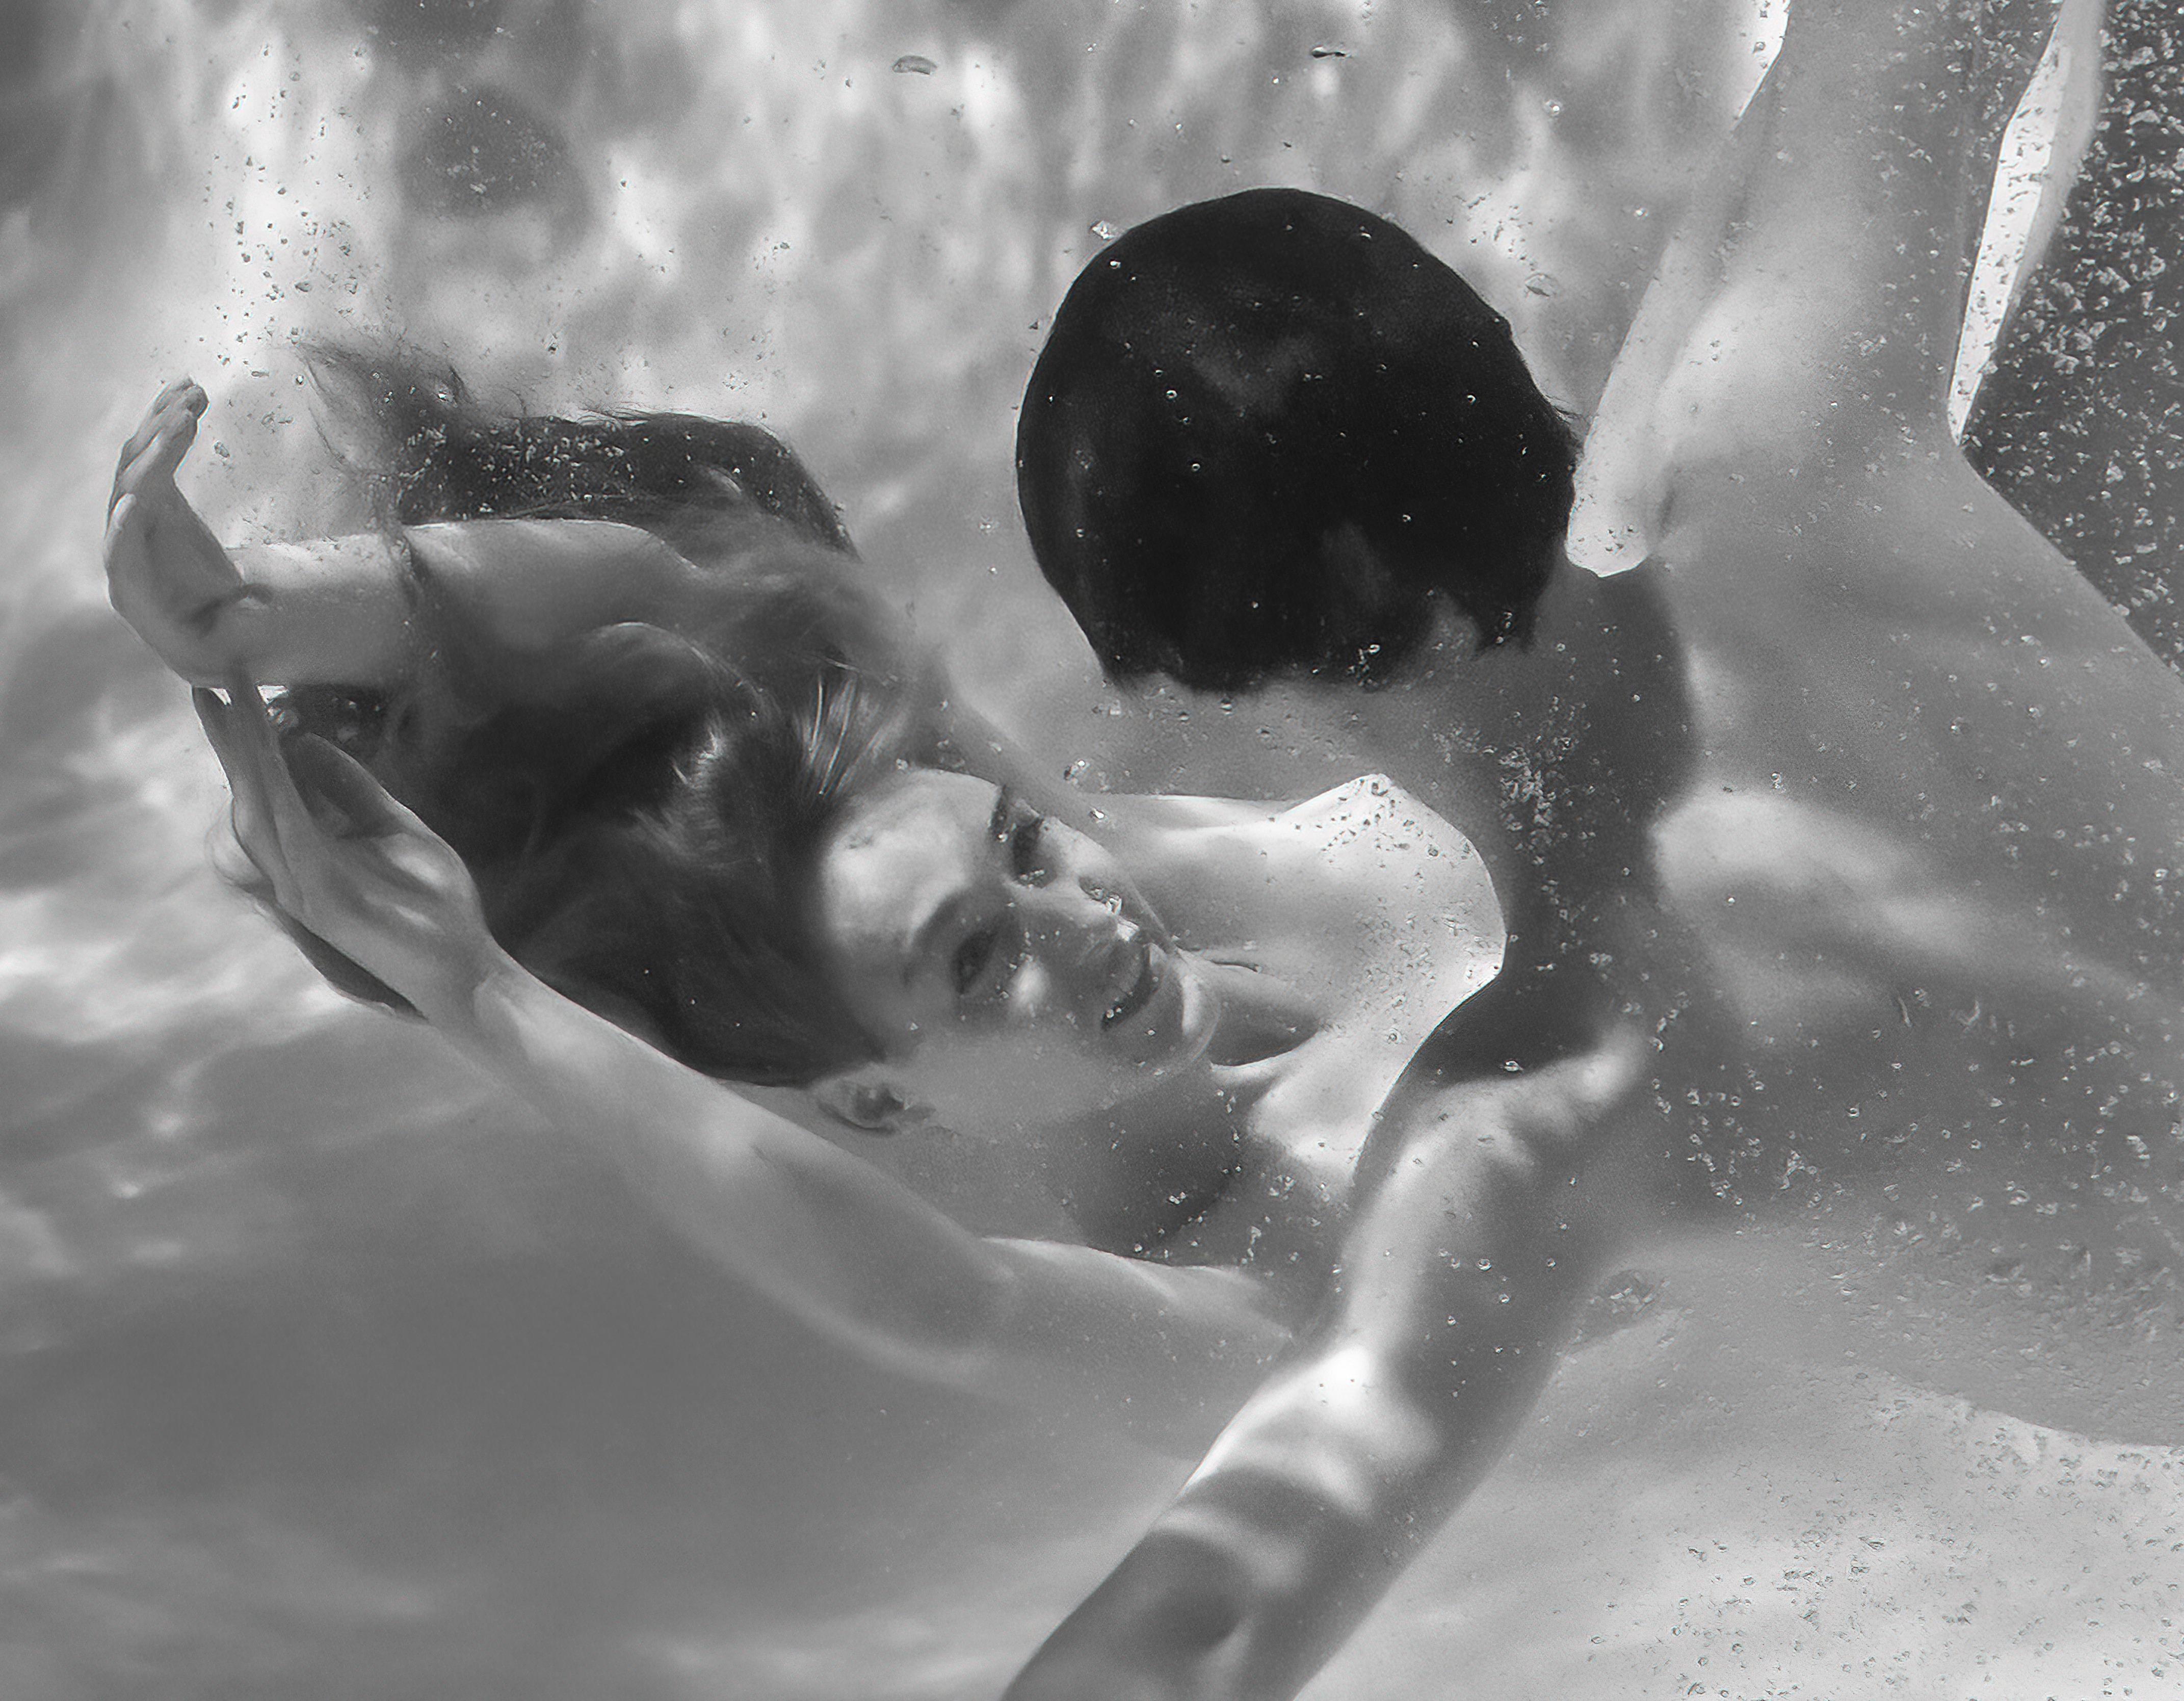 Pool Party VII  - underwater black & white photograph - print on paper 16